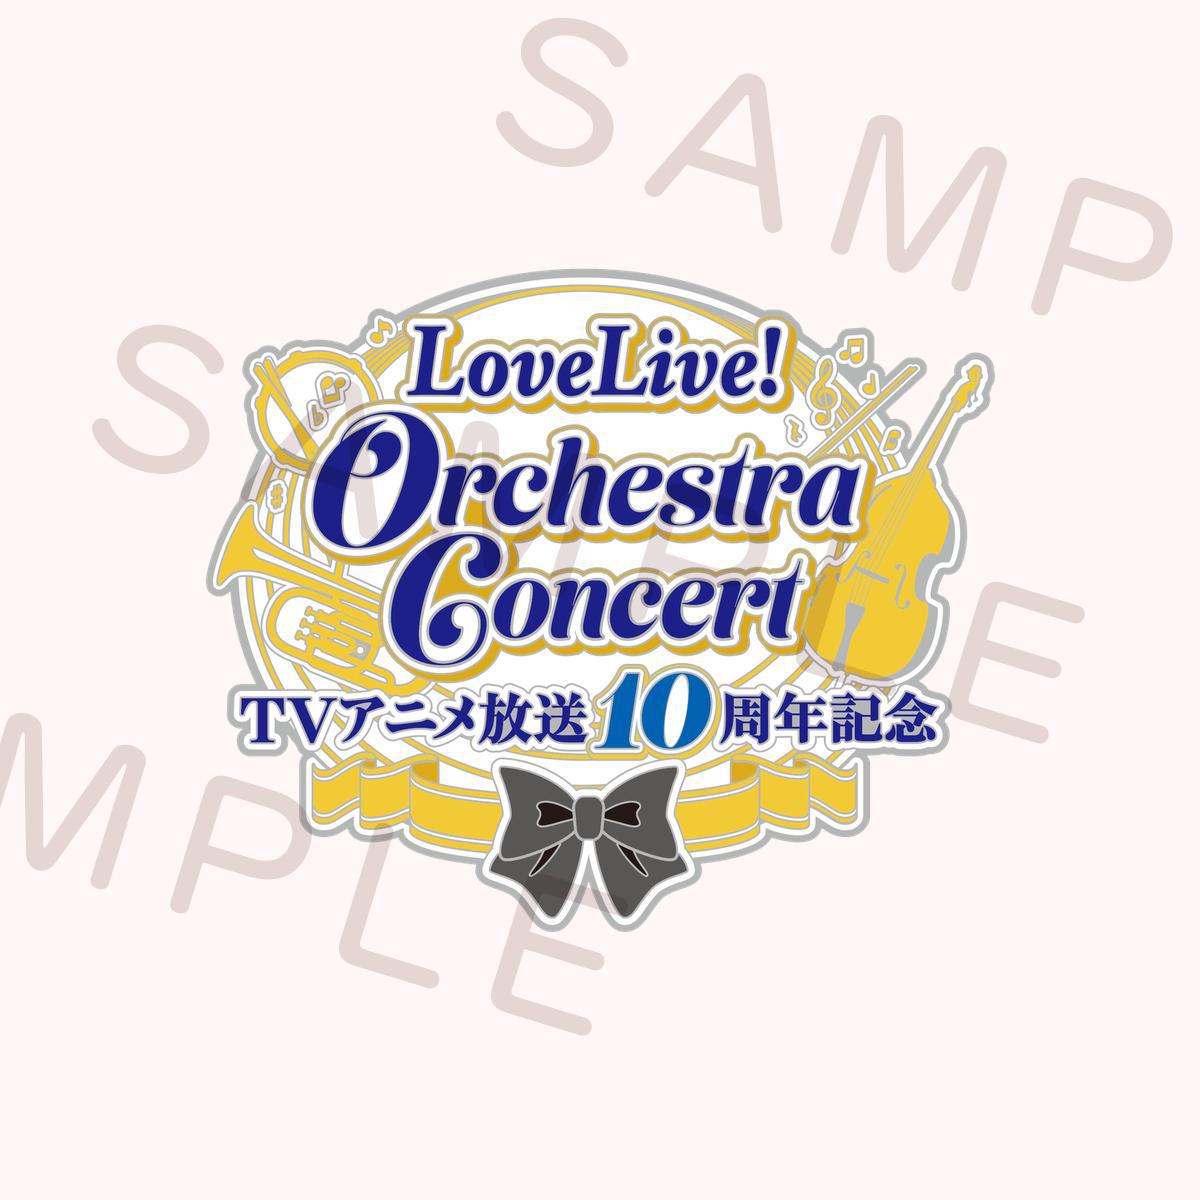 LoveLive! Special Talk Session／Orchestra Concert Memorial Pin